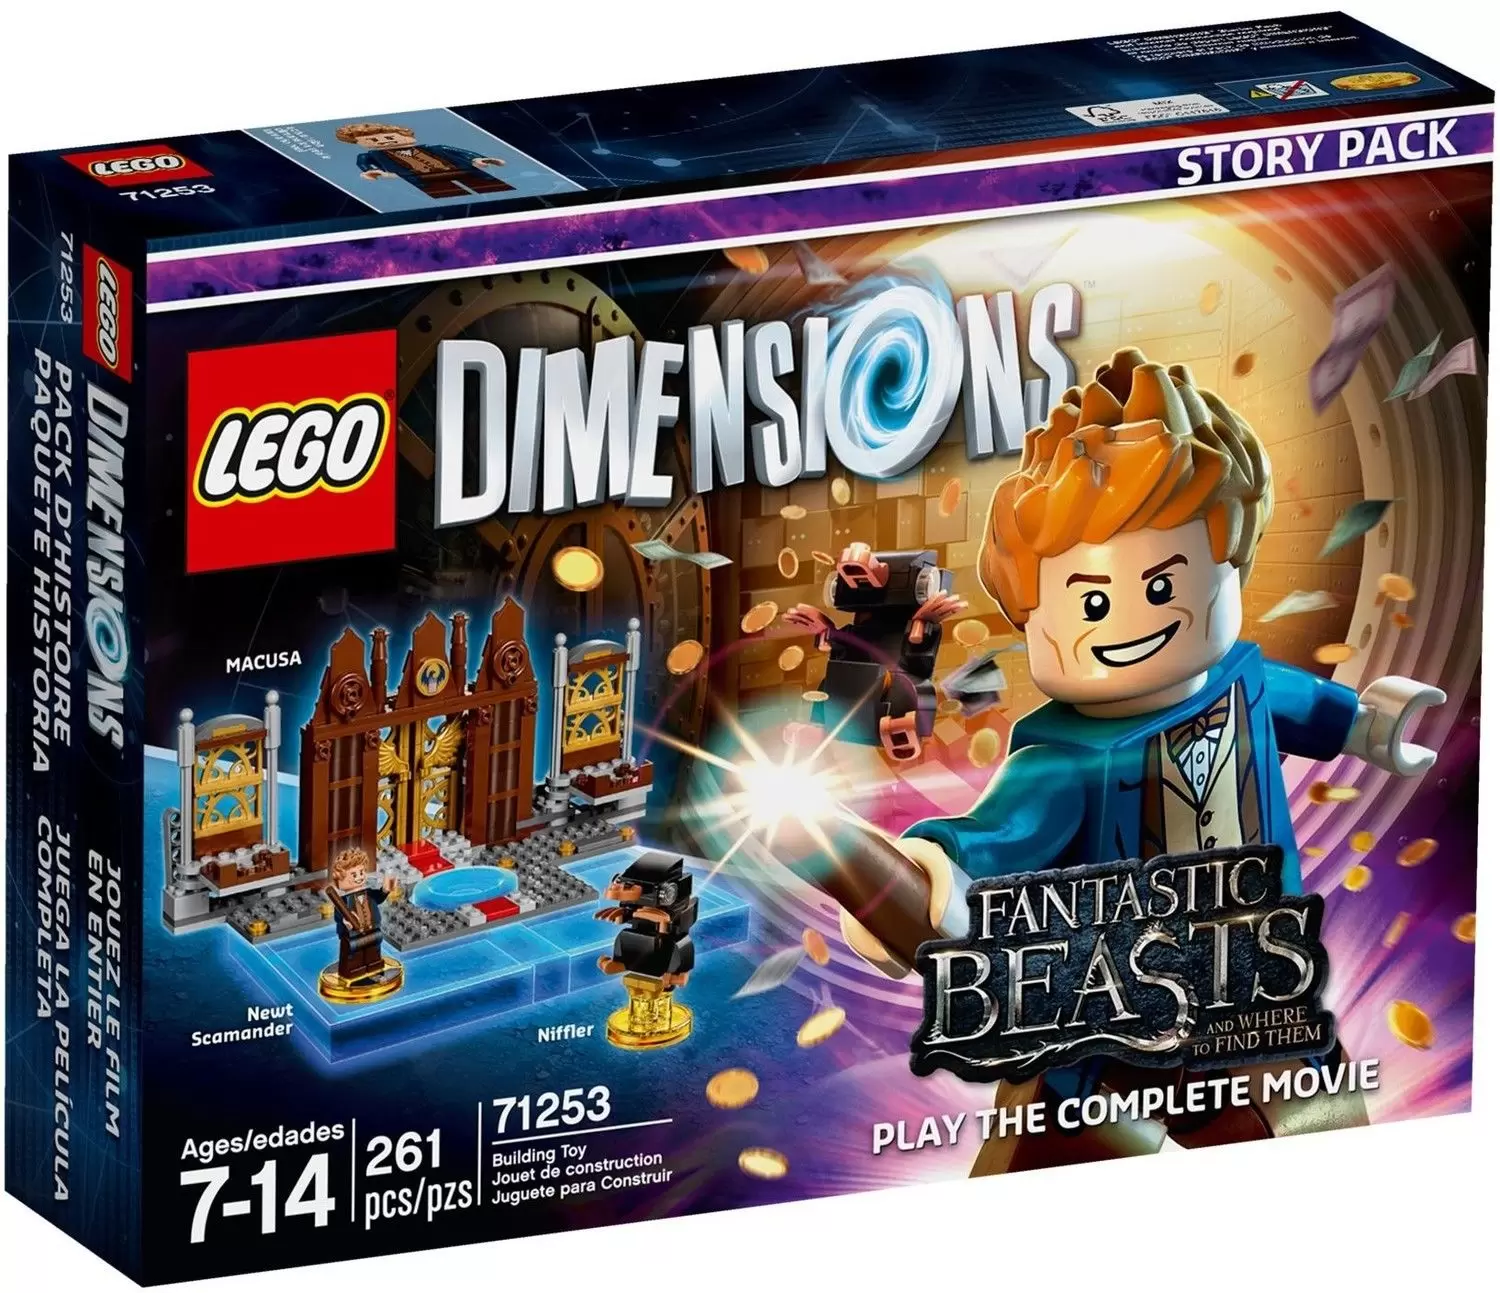 LEGO Dimensions - Fantastic Beasts: Play the Complete Movie